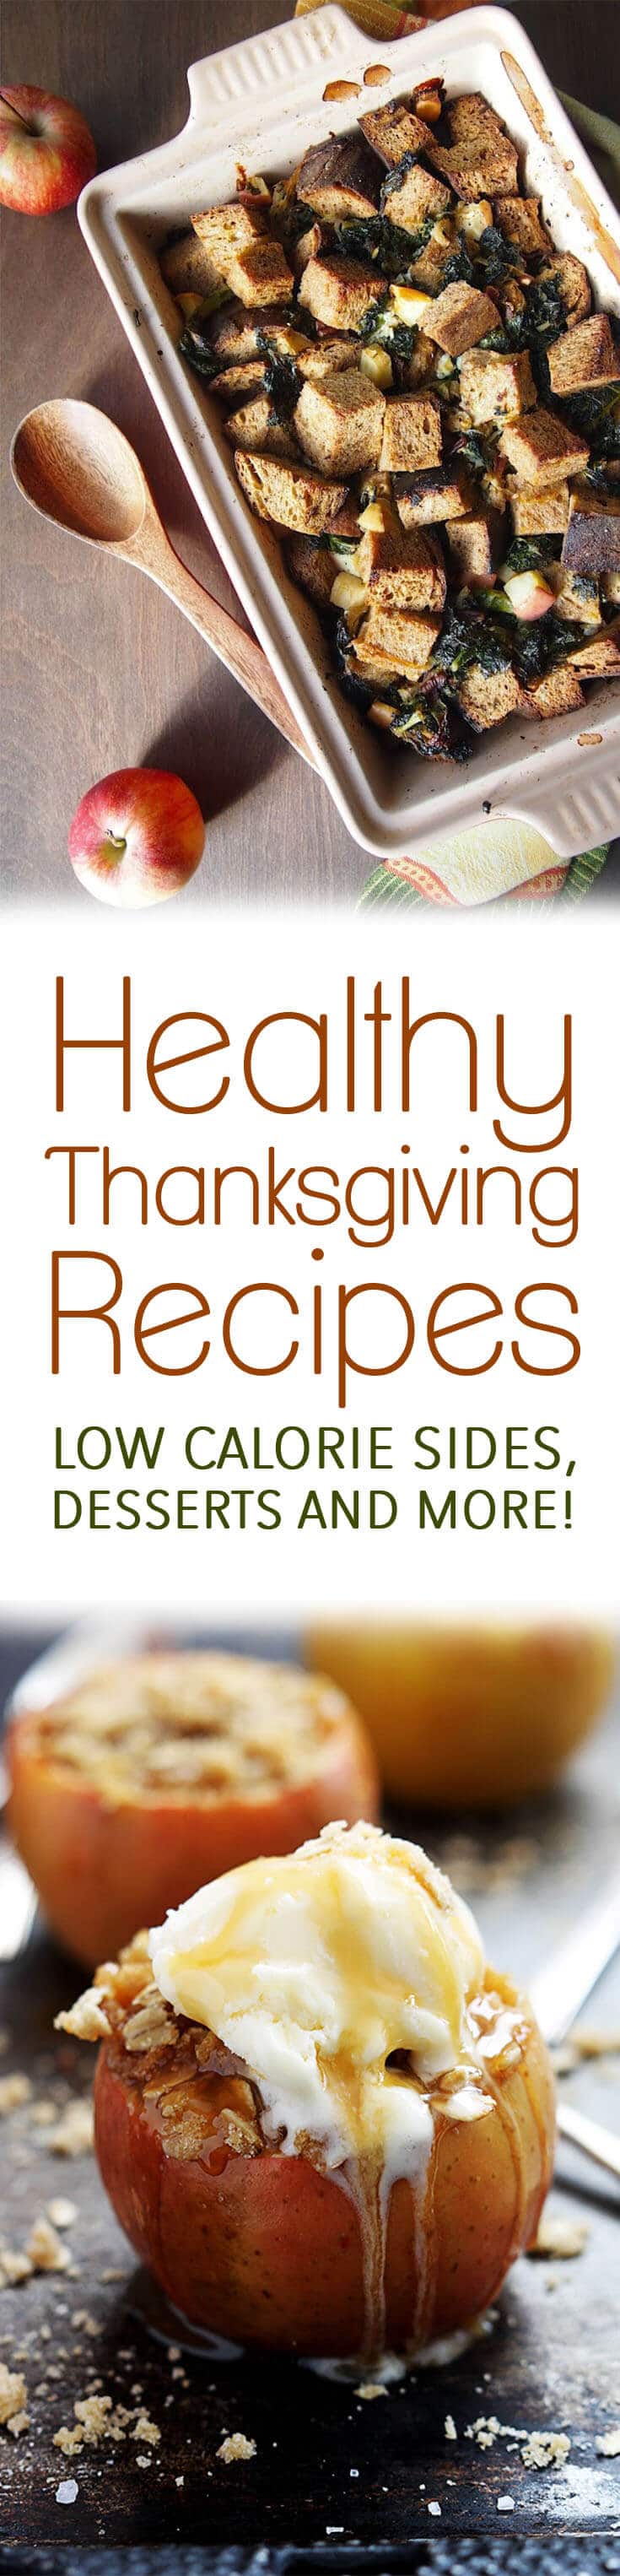 We compiled the best healthy Thanksgiving Recipes for low calorie side dishes, desserts, appetizers and mains!